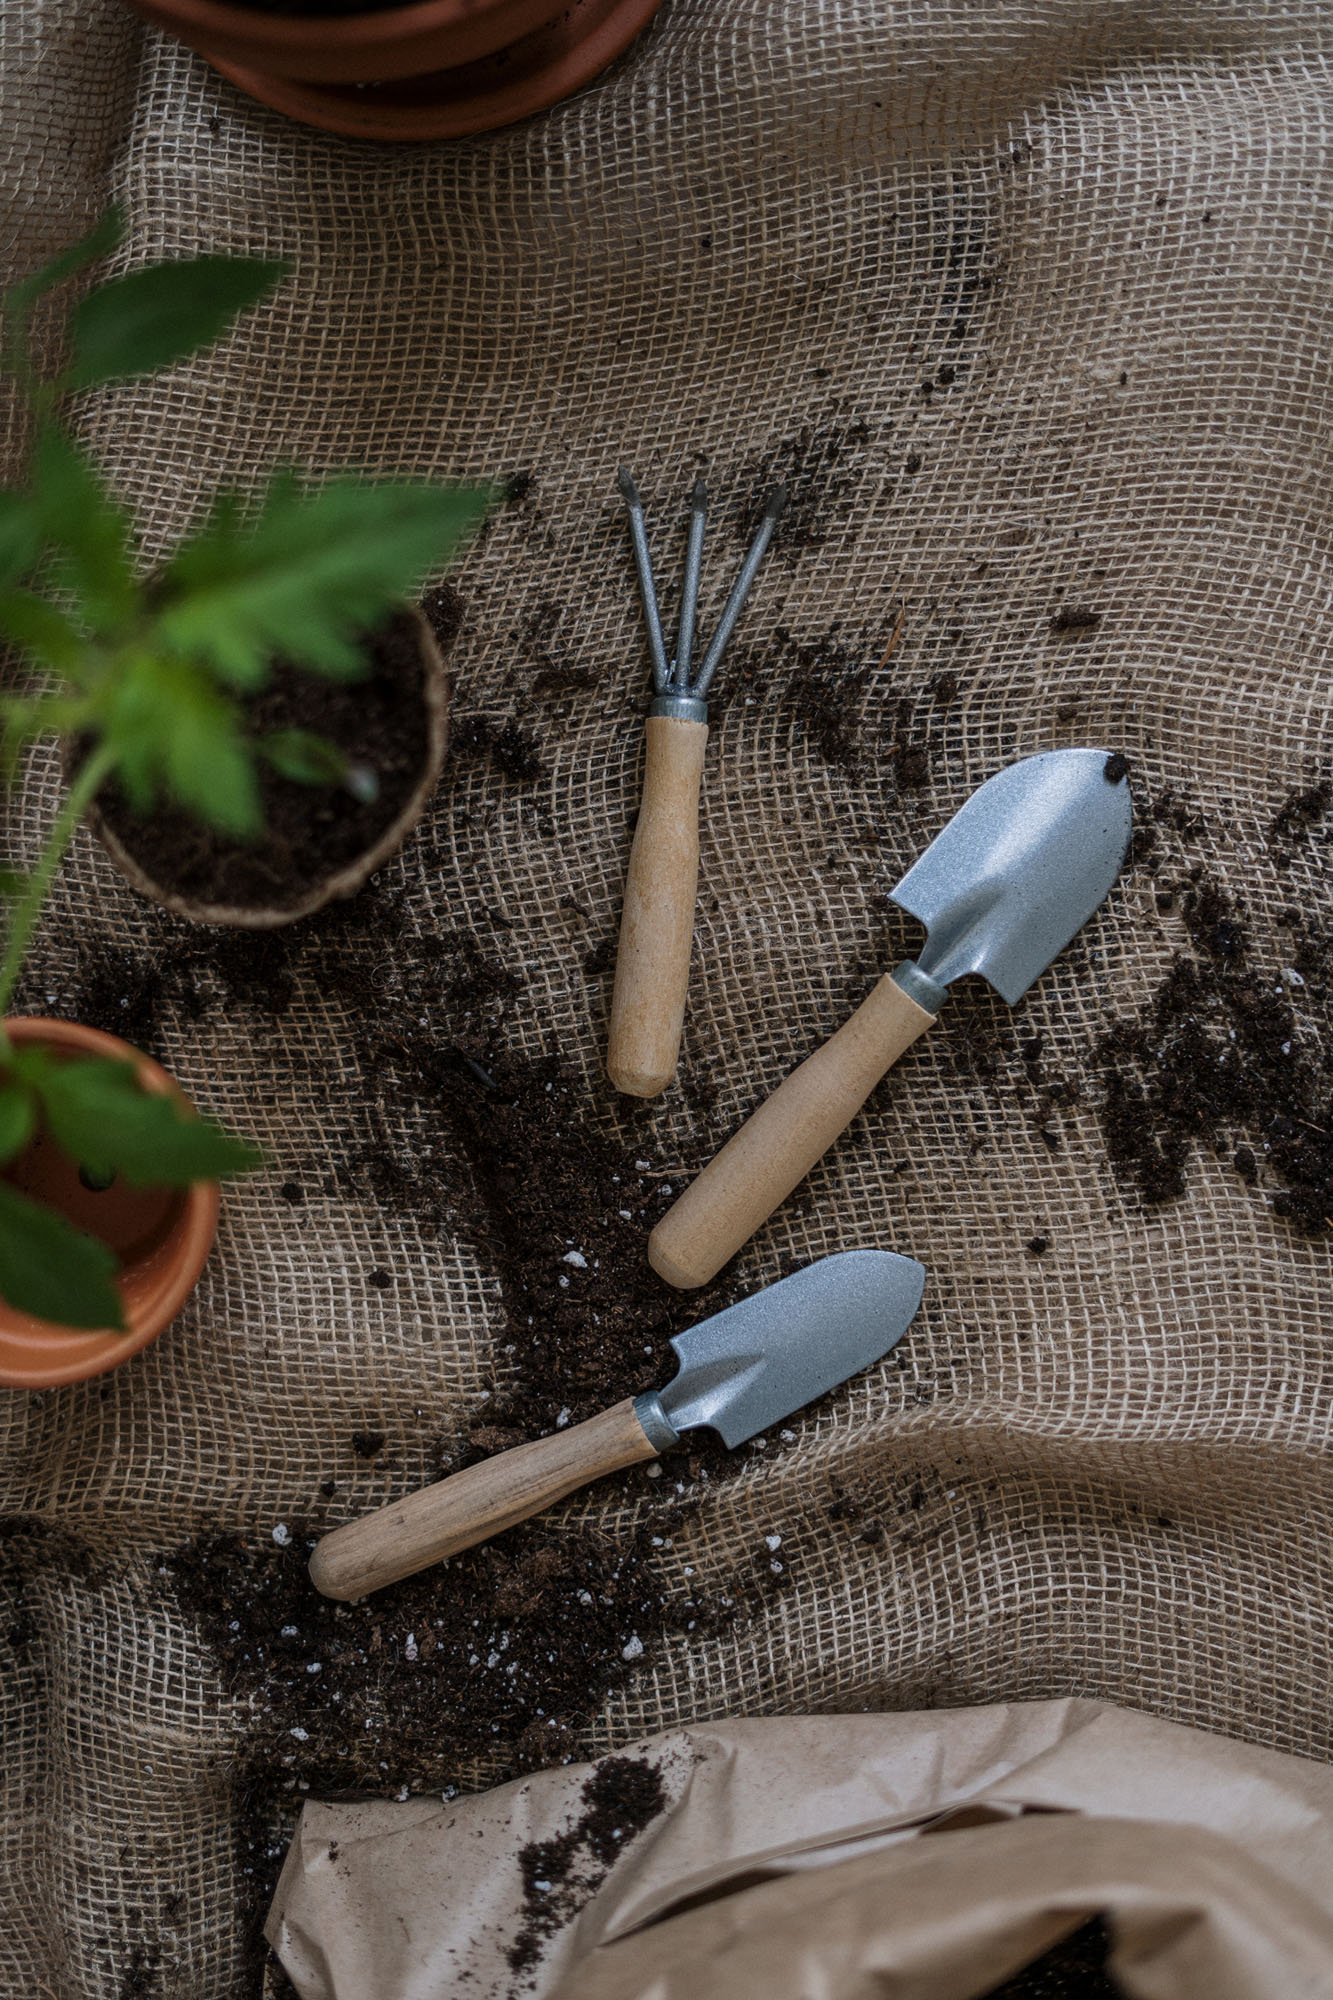 tools and and plants